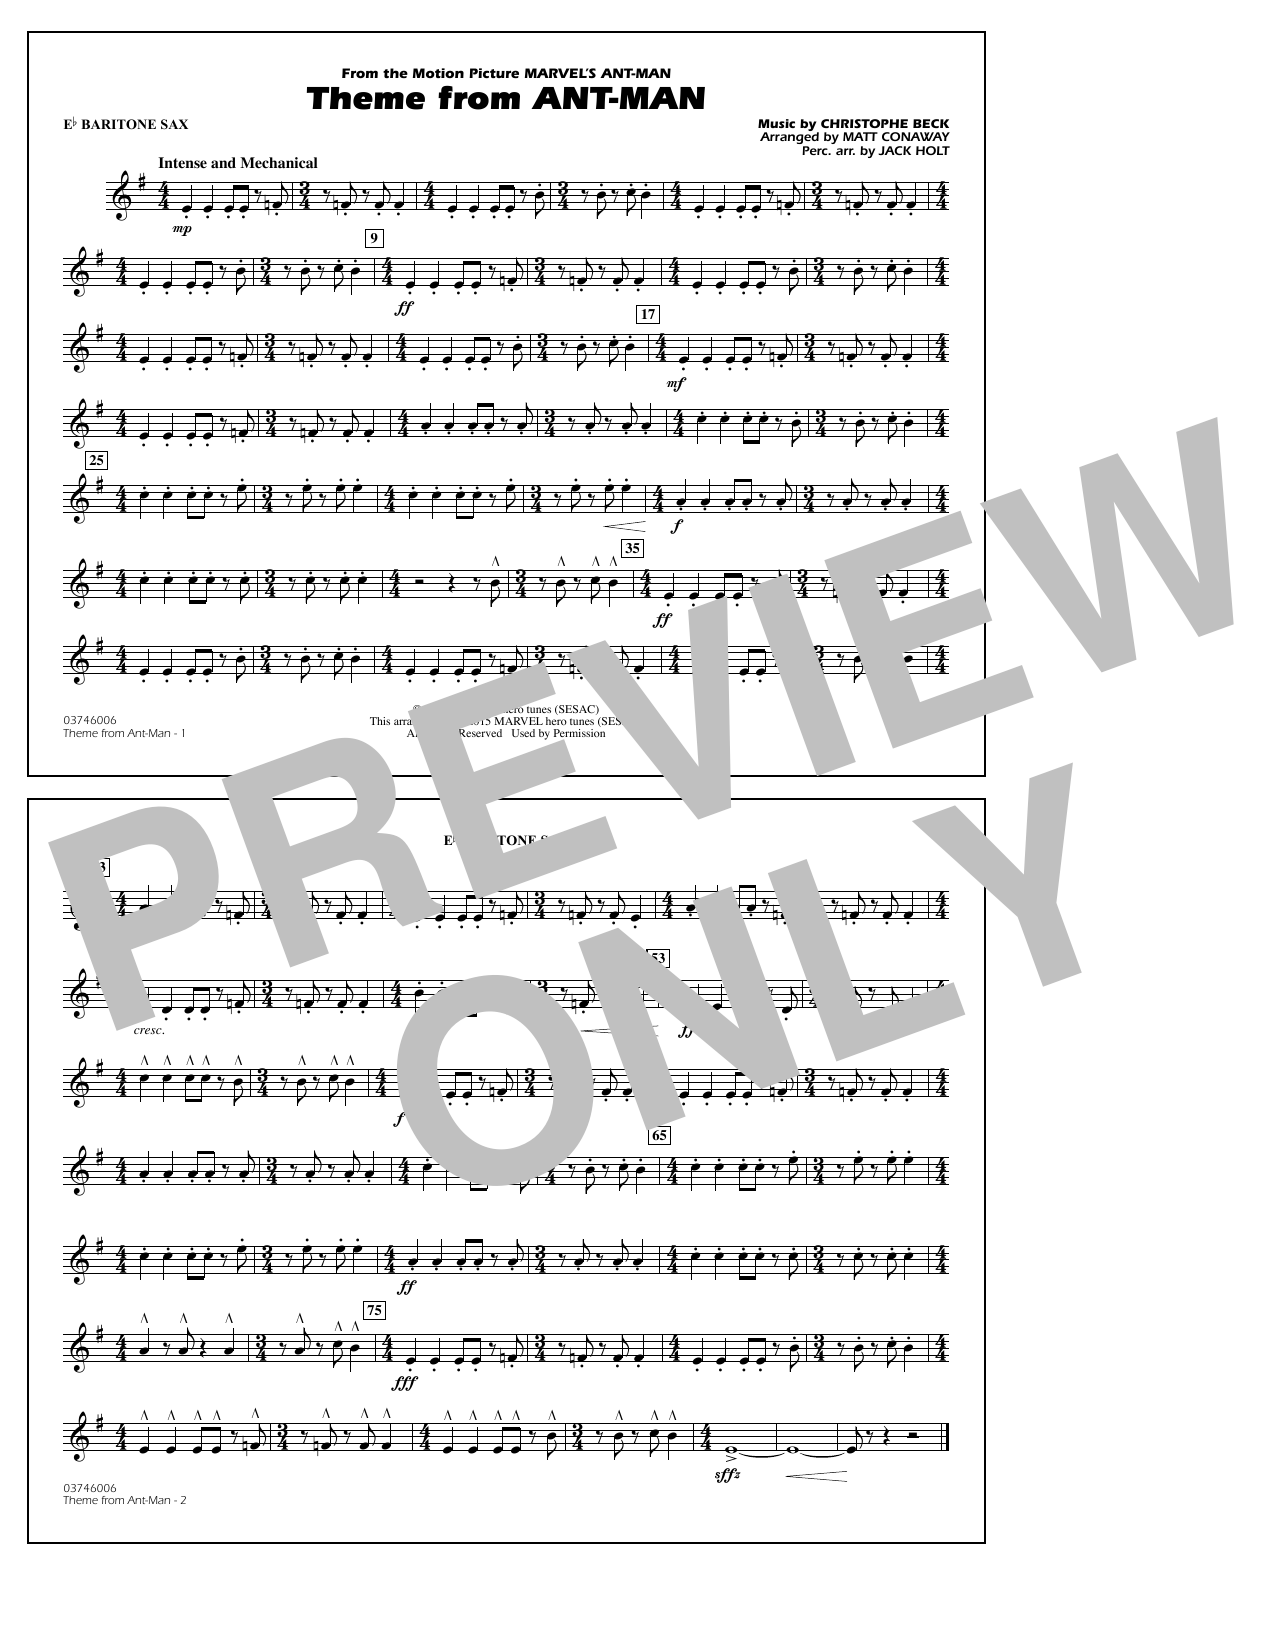 Christophe Beck Theme from Ant-Man (Arr. Matt Conaway) - Eb Baritone Sax sheet music preview music notes and score for Marching Band including 1 page(s)